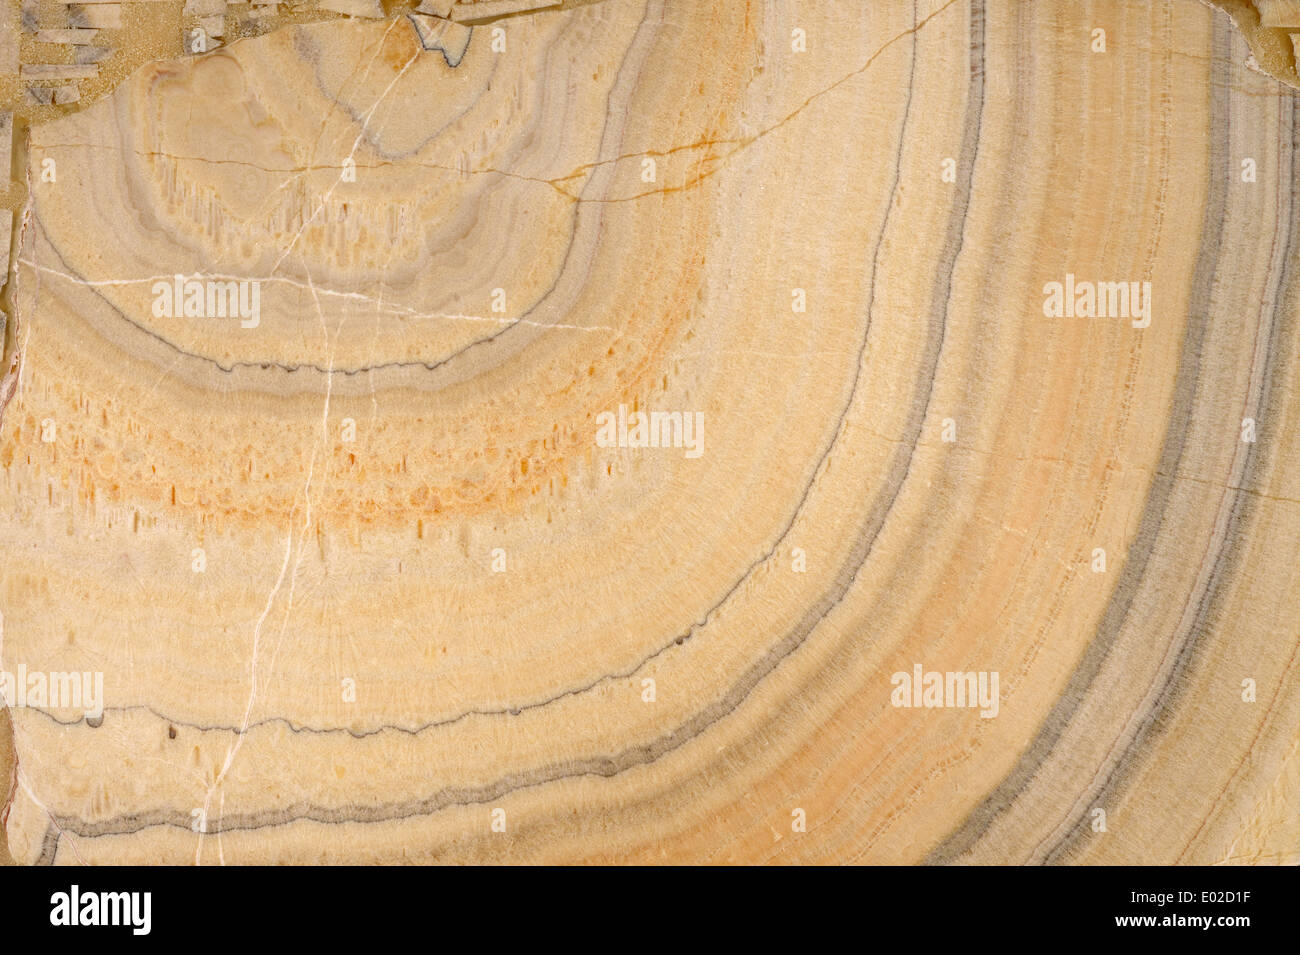 Natural Stone Textures For Design Stock Photo